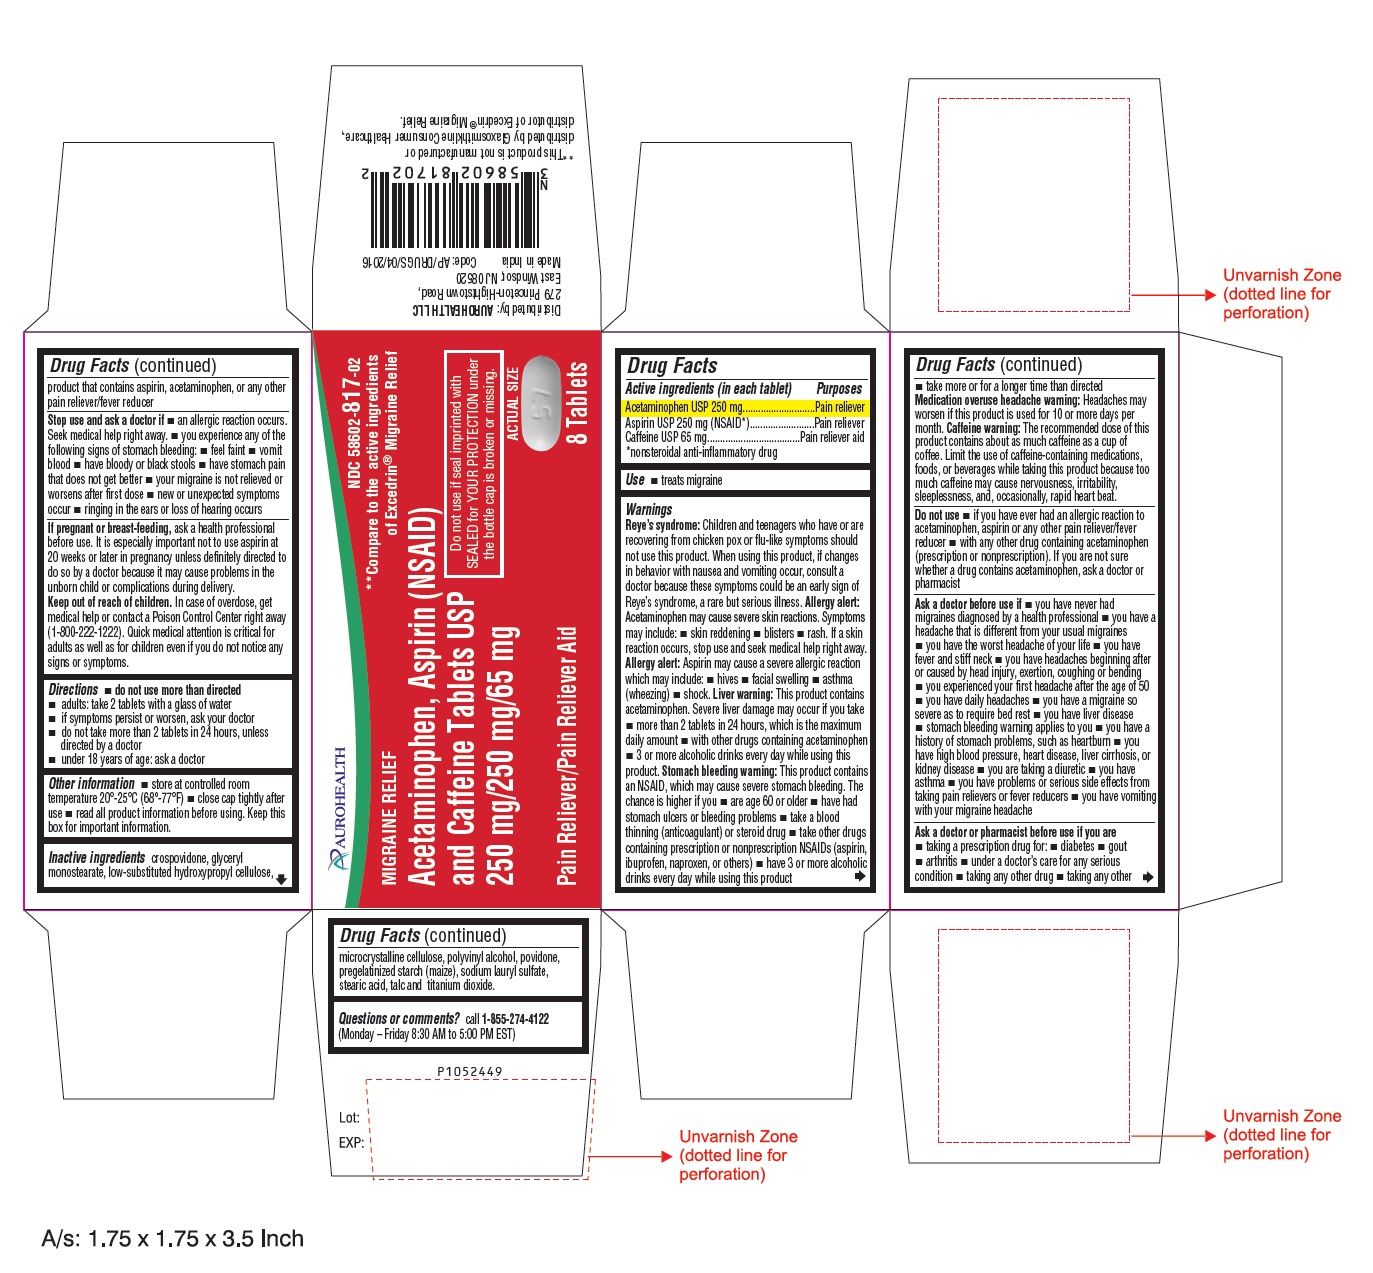 PACKAGE LABEL-PRINCIPAL DISPLAY PANEL - 250 mg/250 mg/65 mg Container Carton Label - 8 Tablets